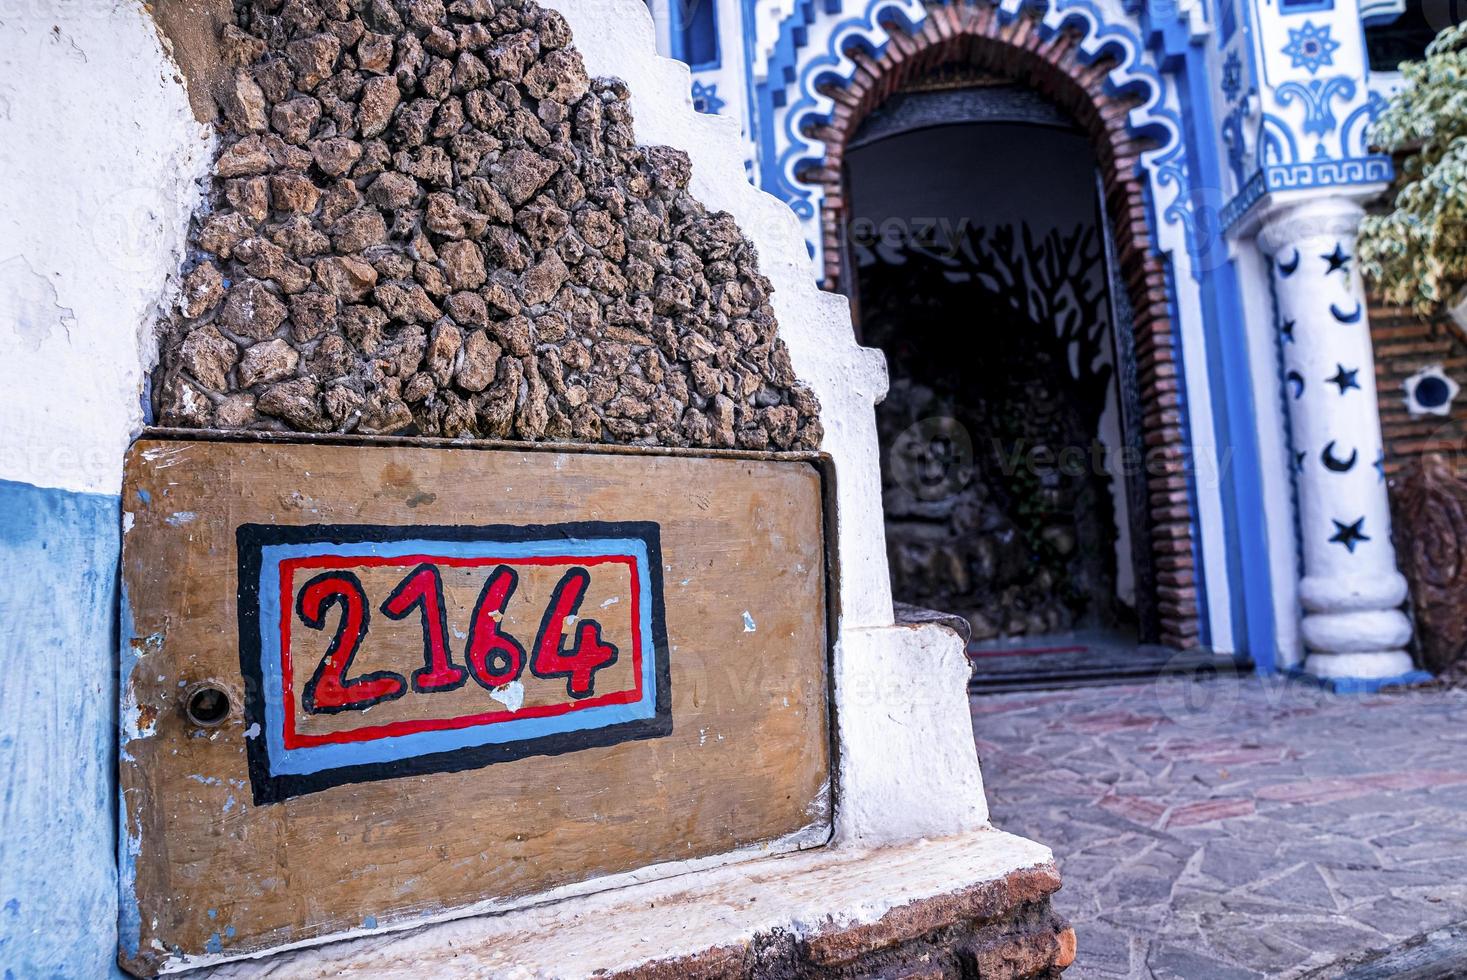 Footpath with house number on wooden plank, abstract ornate through arched entrance photo